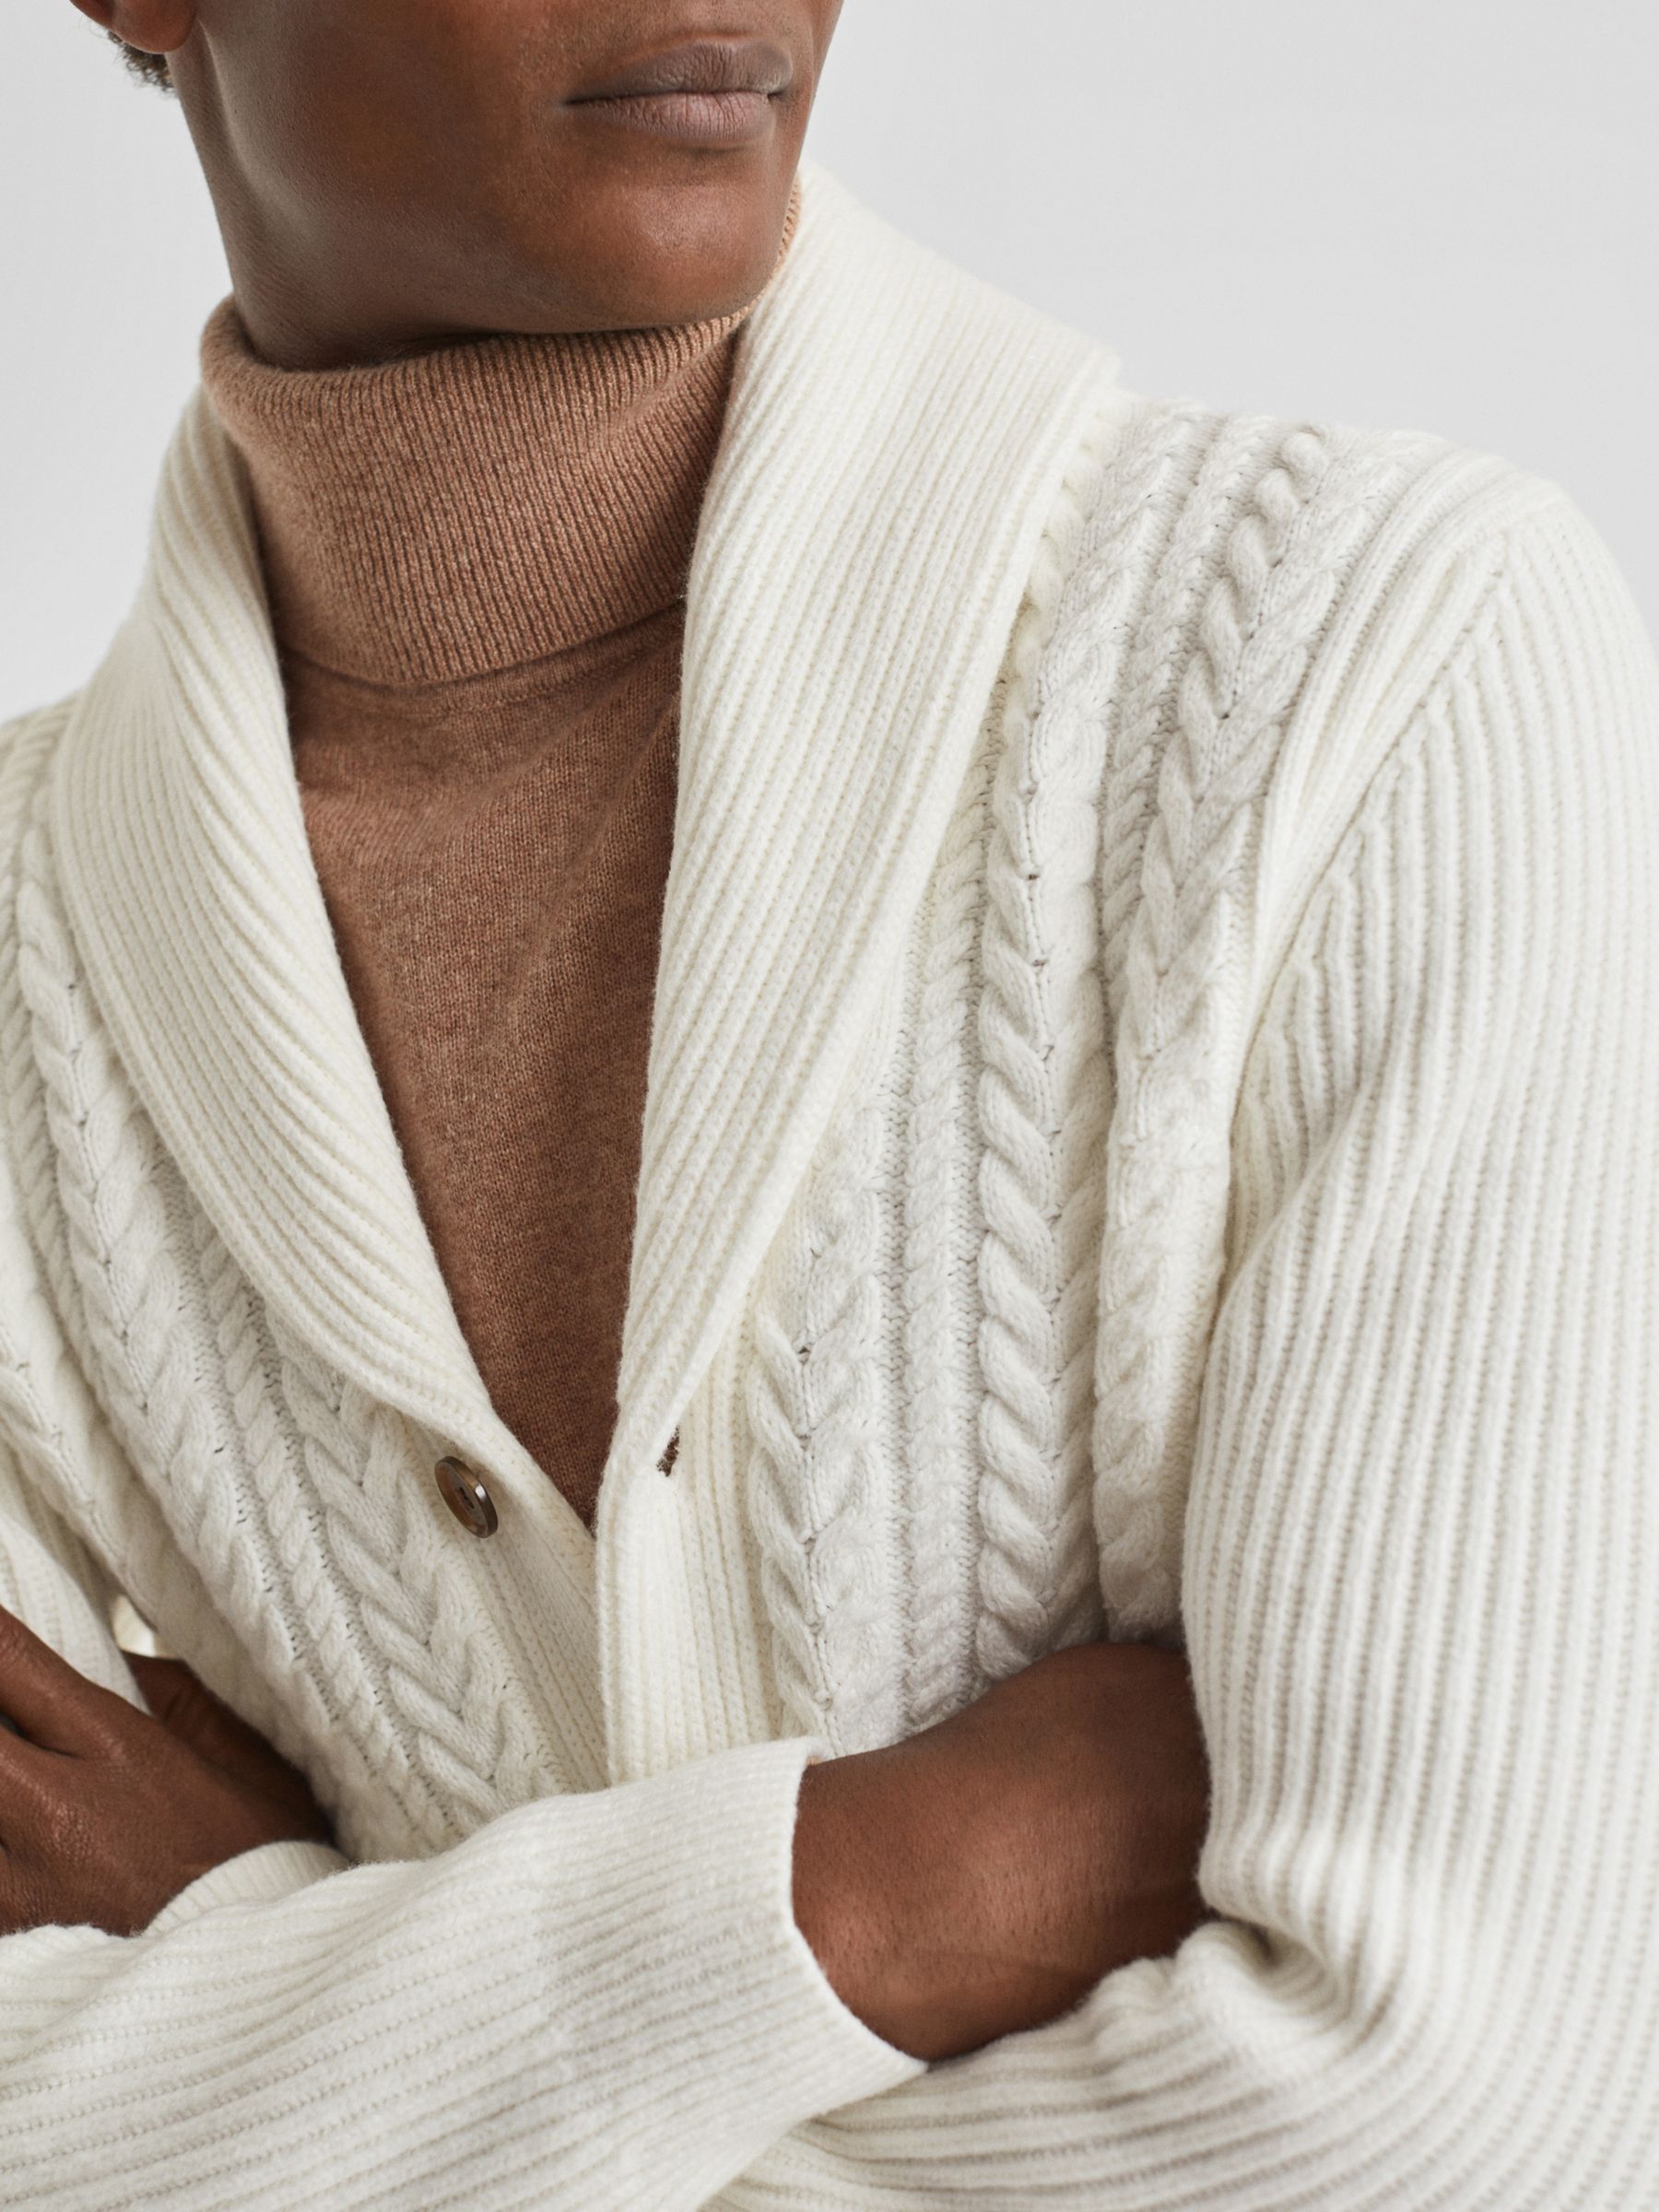 LV x YK Monogram Faces Knitted Cardigan - Men - Ready-to-Wear